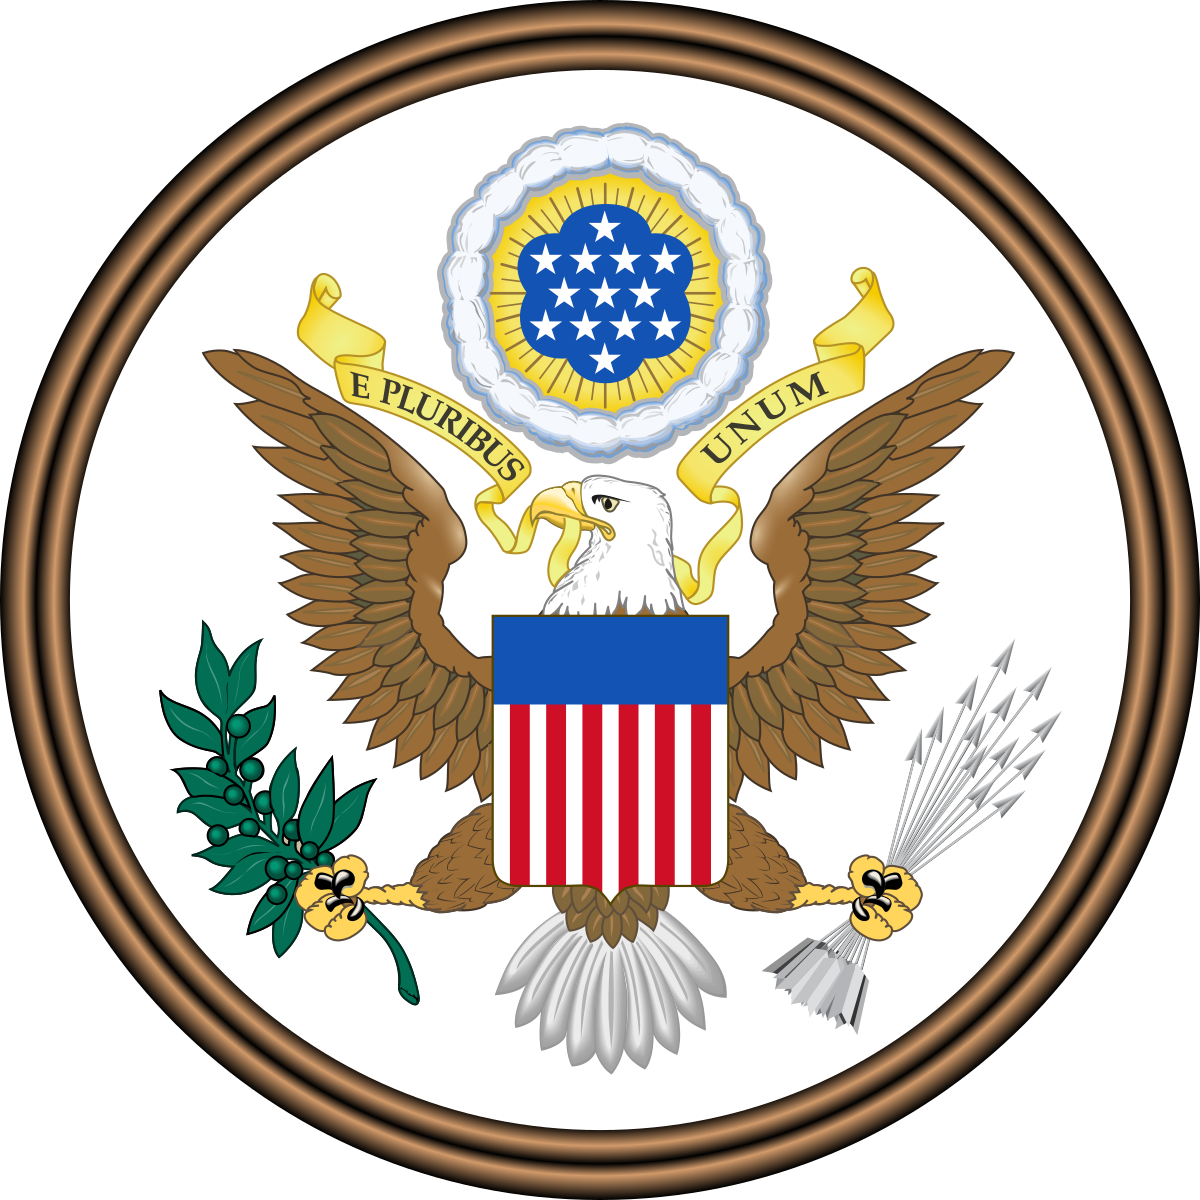 americans with disabilities act of 1990 - wikipedia